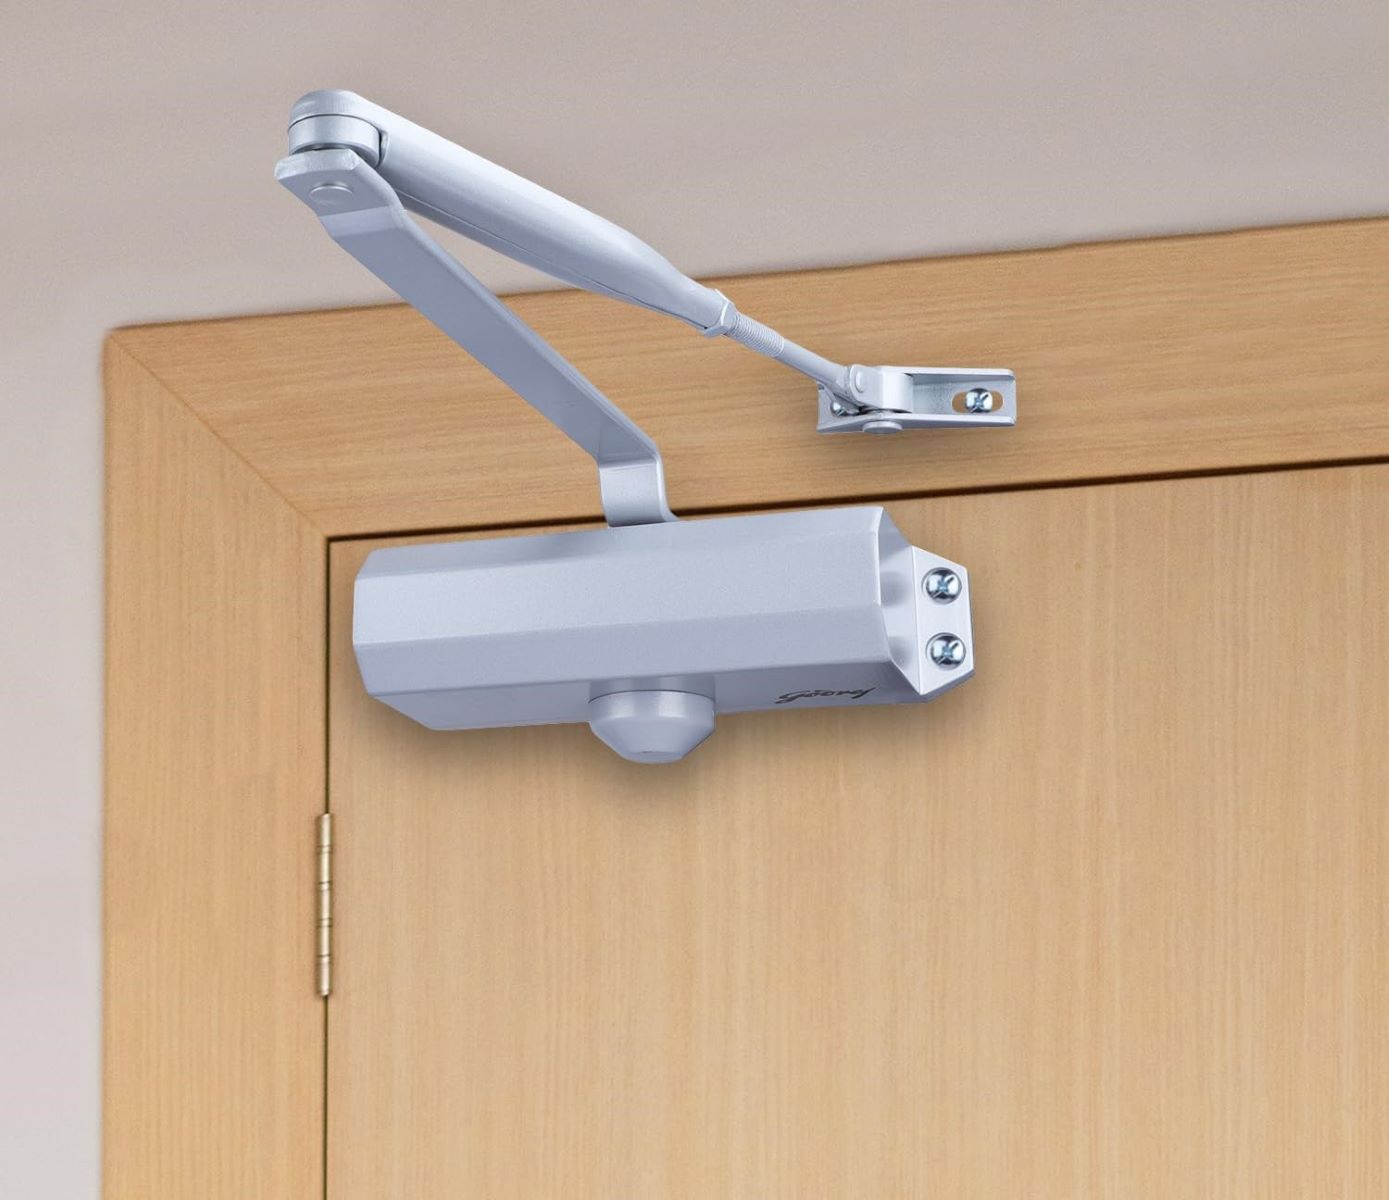 Adjusting The Strength And Power Of A Door Closer: A Step-by-Step Guide